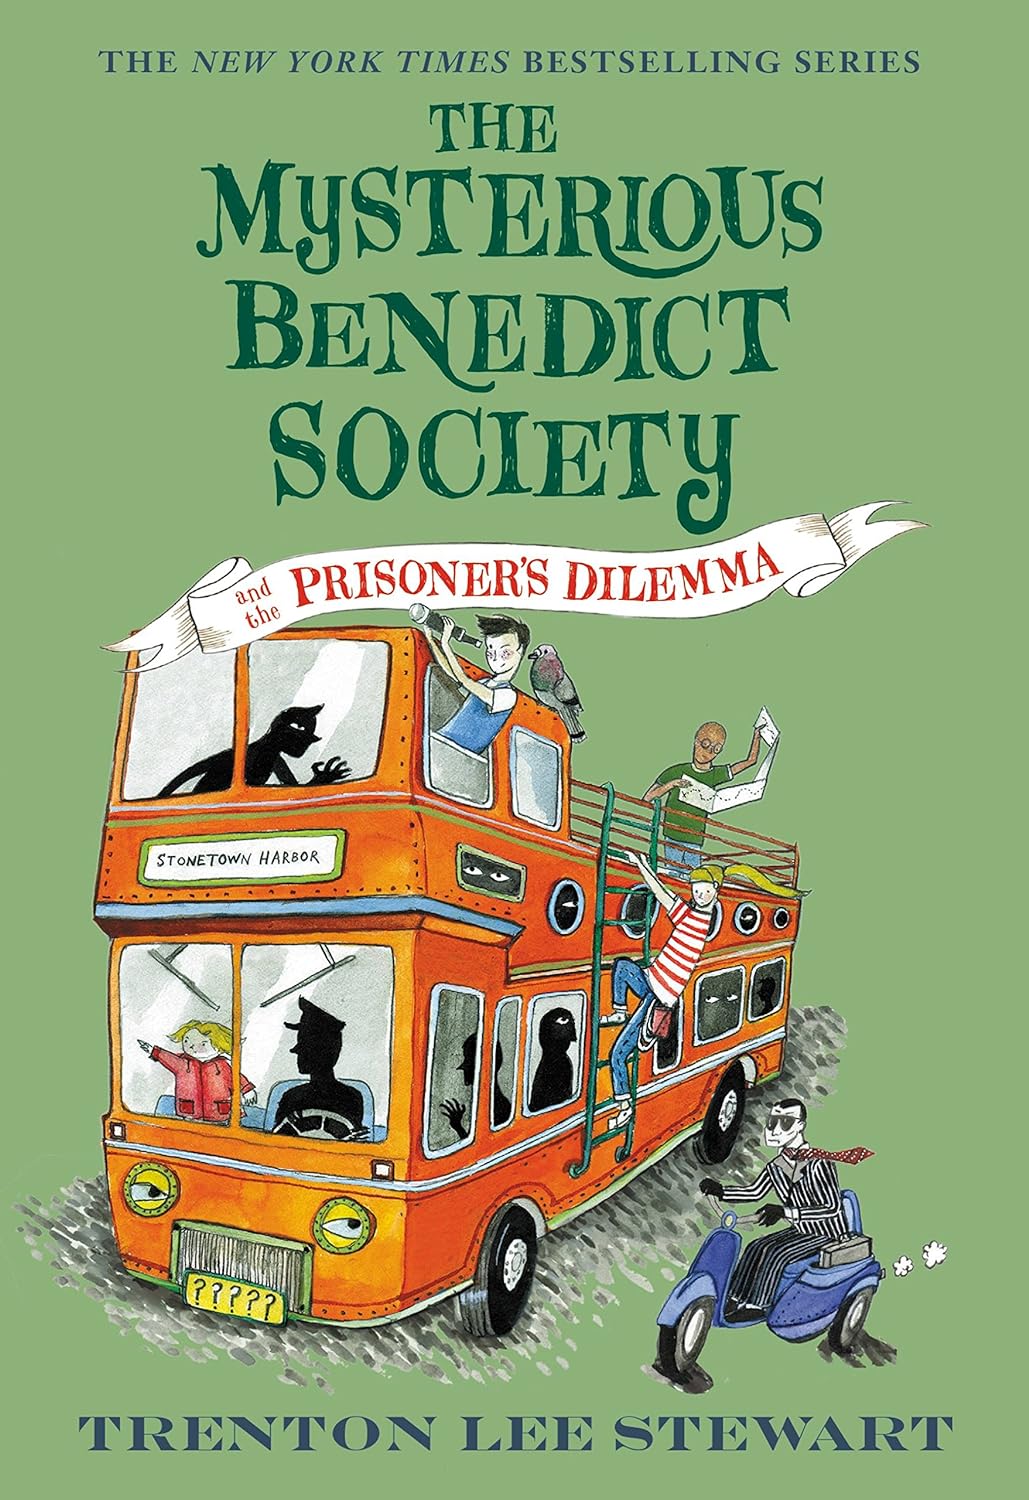 The Mysterious Benedict Society and the Prisoner's Dilemma - by Trenton Lee Stewart